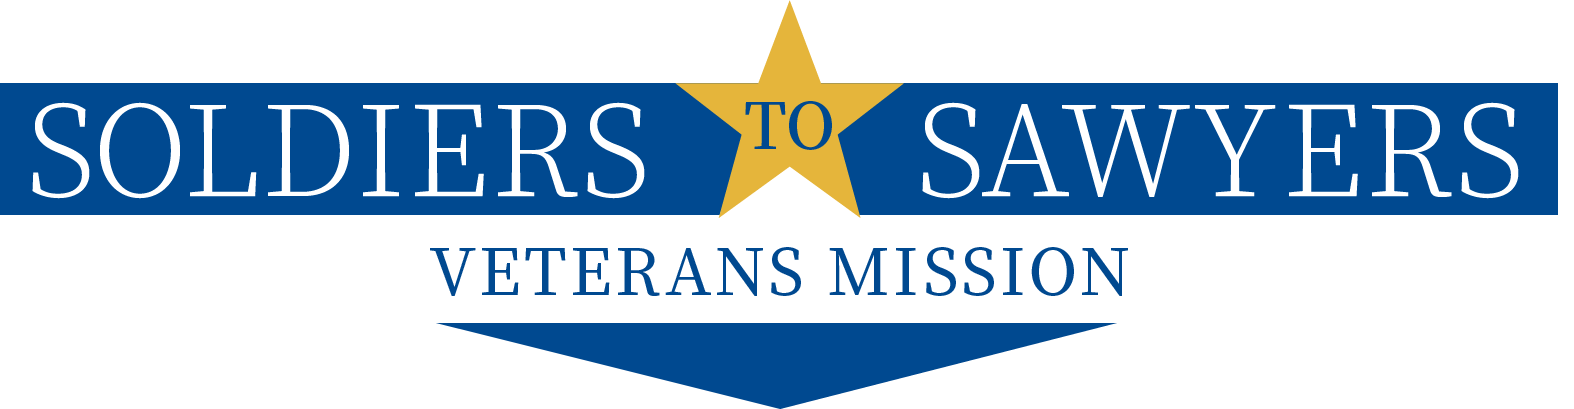 soldiers to sawyers veterans mission